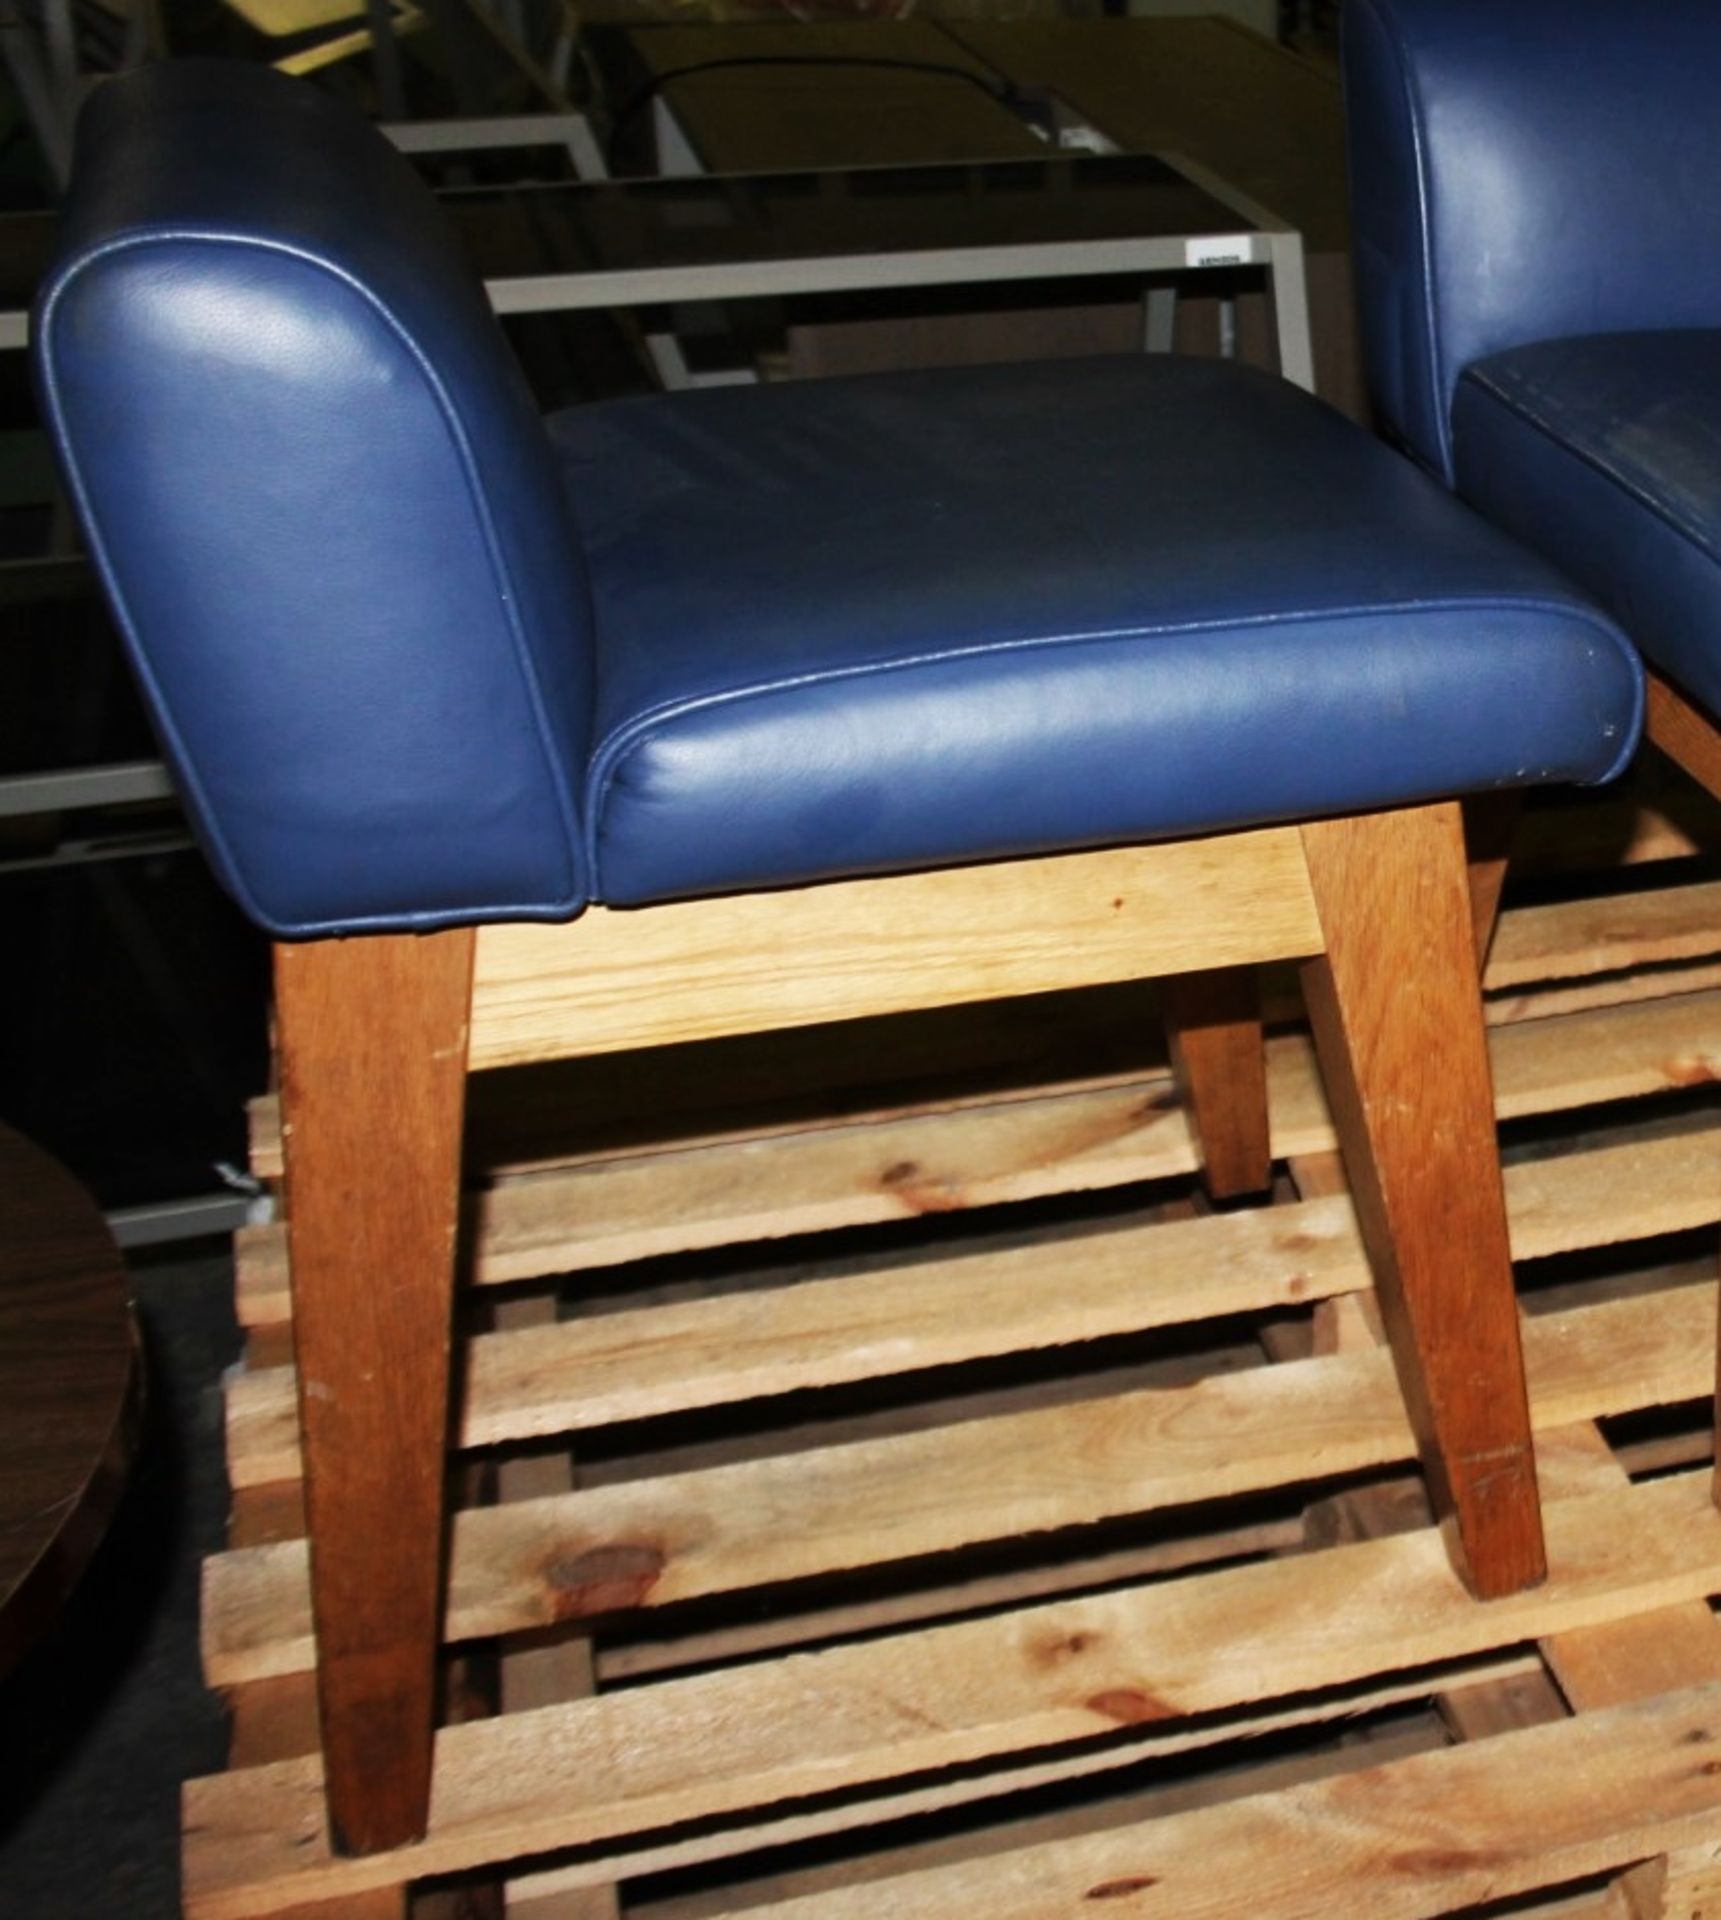 A Pair Of Stylish Low Back Restaurant Chairs With Bright Blue Faux Leather Upholstery - - Image 3 of 4